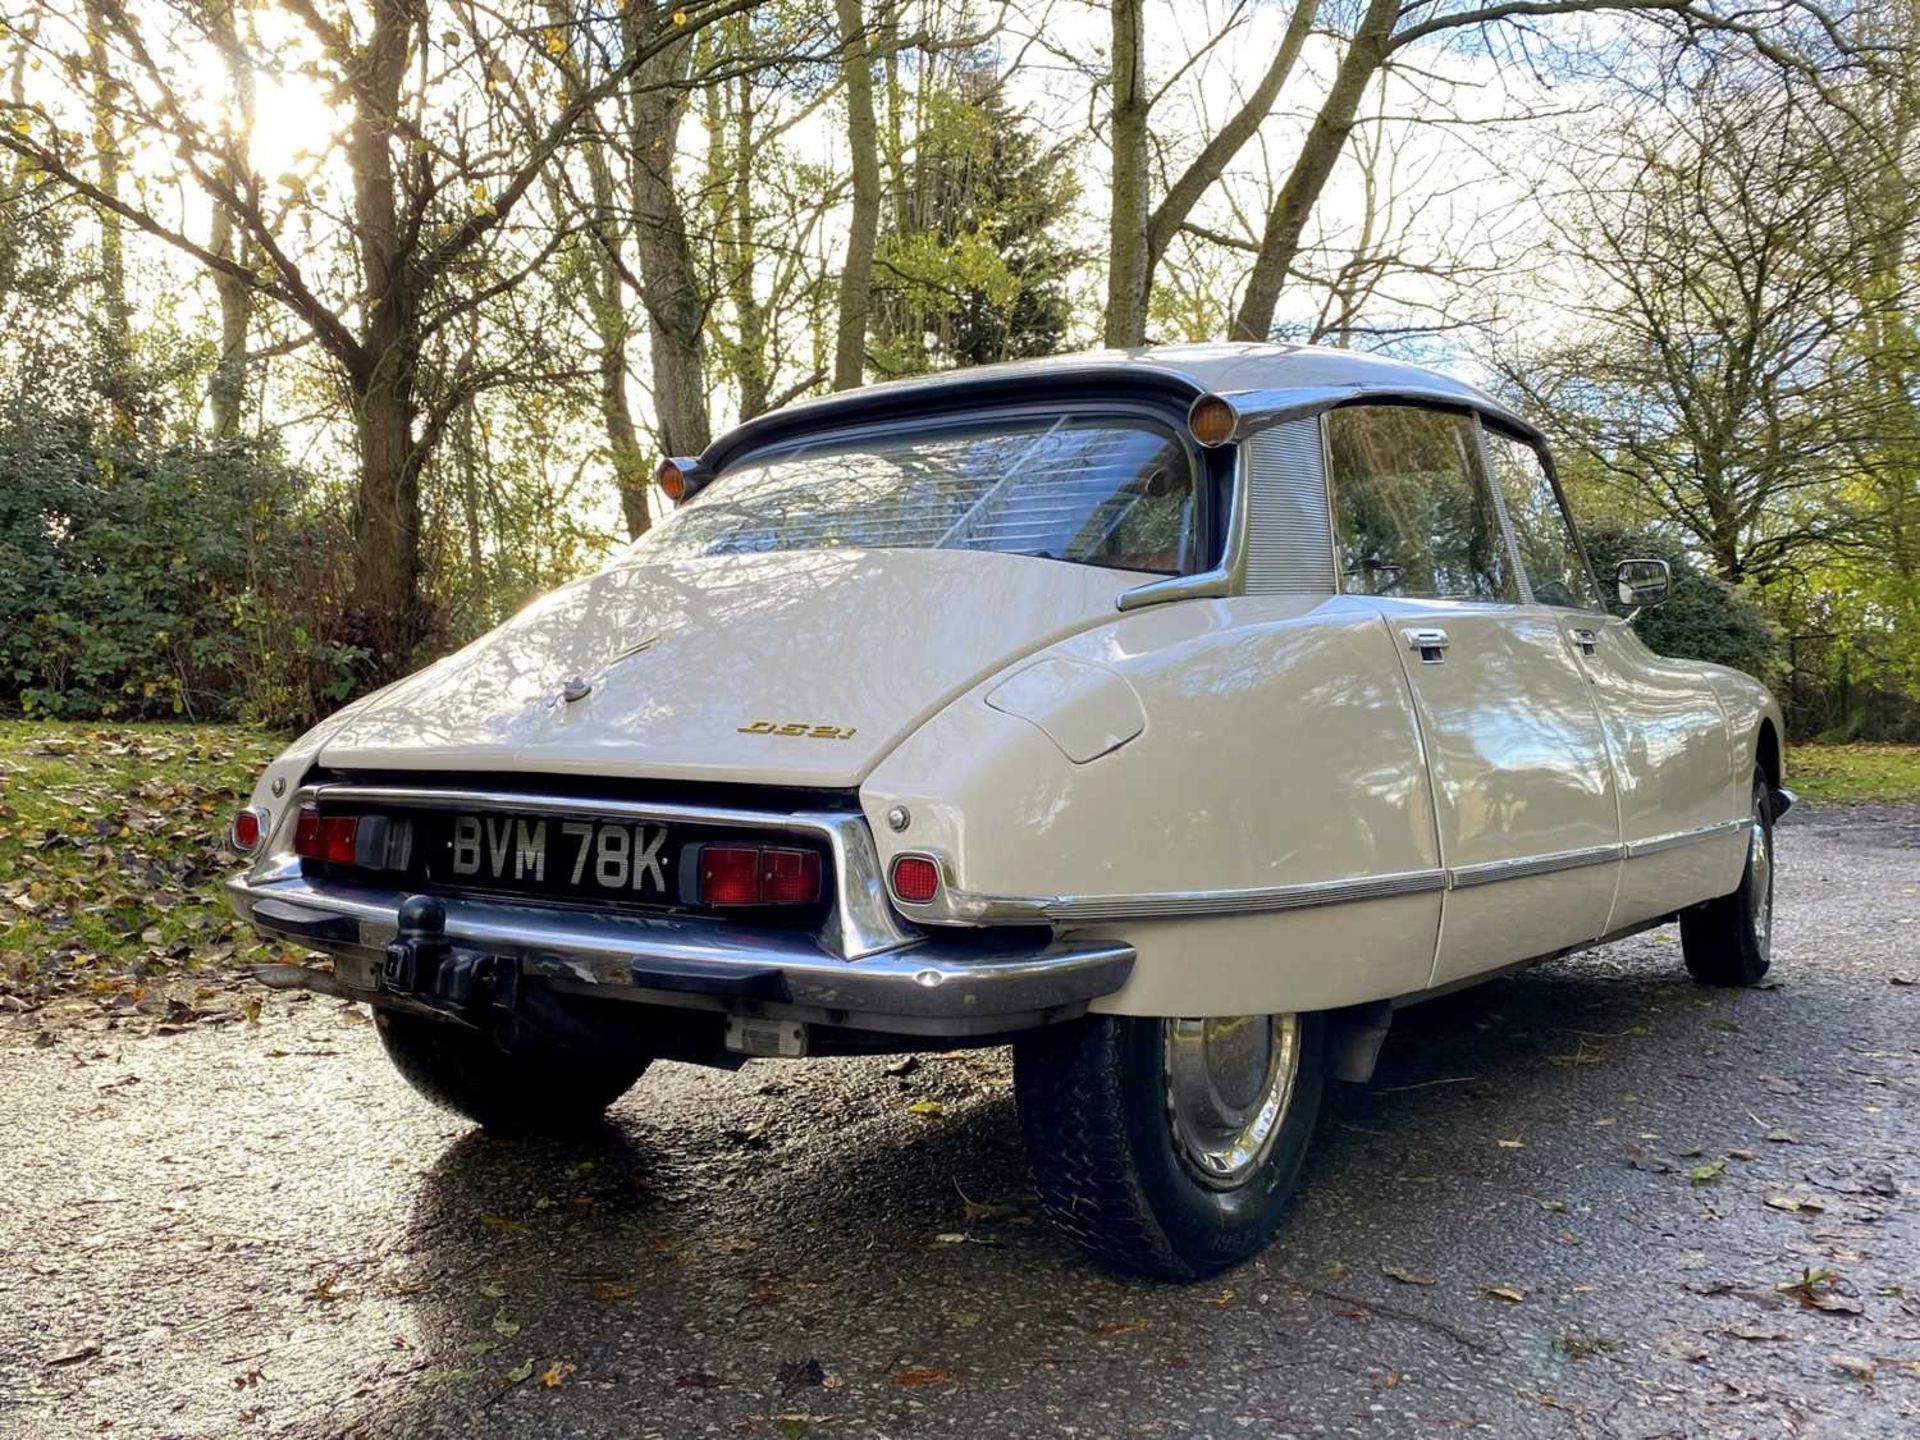 1971 Citroën DS21 Recently completed a 2,000 mile European grand tour - Image 28 of 100